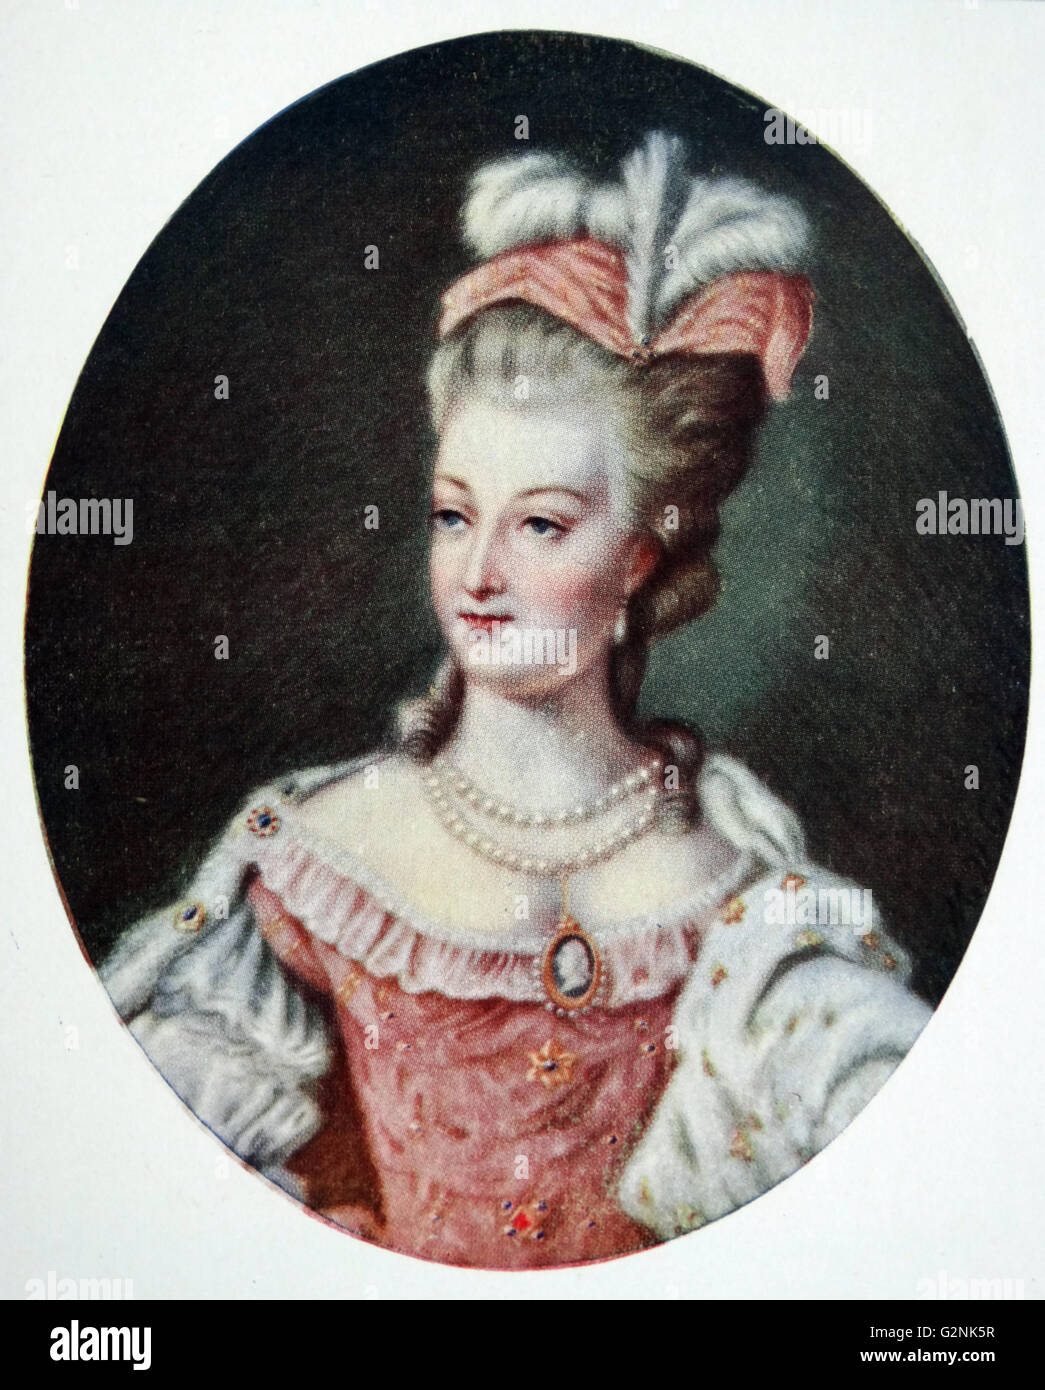 Marie Antoinette (1755-1783) born an Archduchess of Austria, was Dauphine of France from 1770-1774 and Queen of France and Navarre from 1774-1792. By M. V. Costa Stock Photo